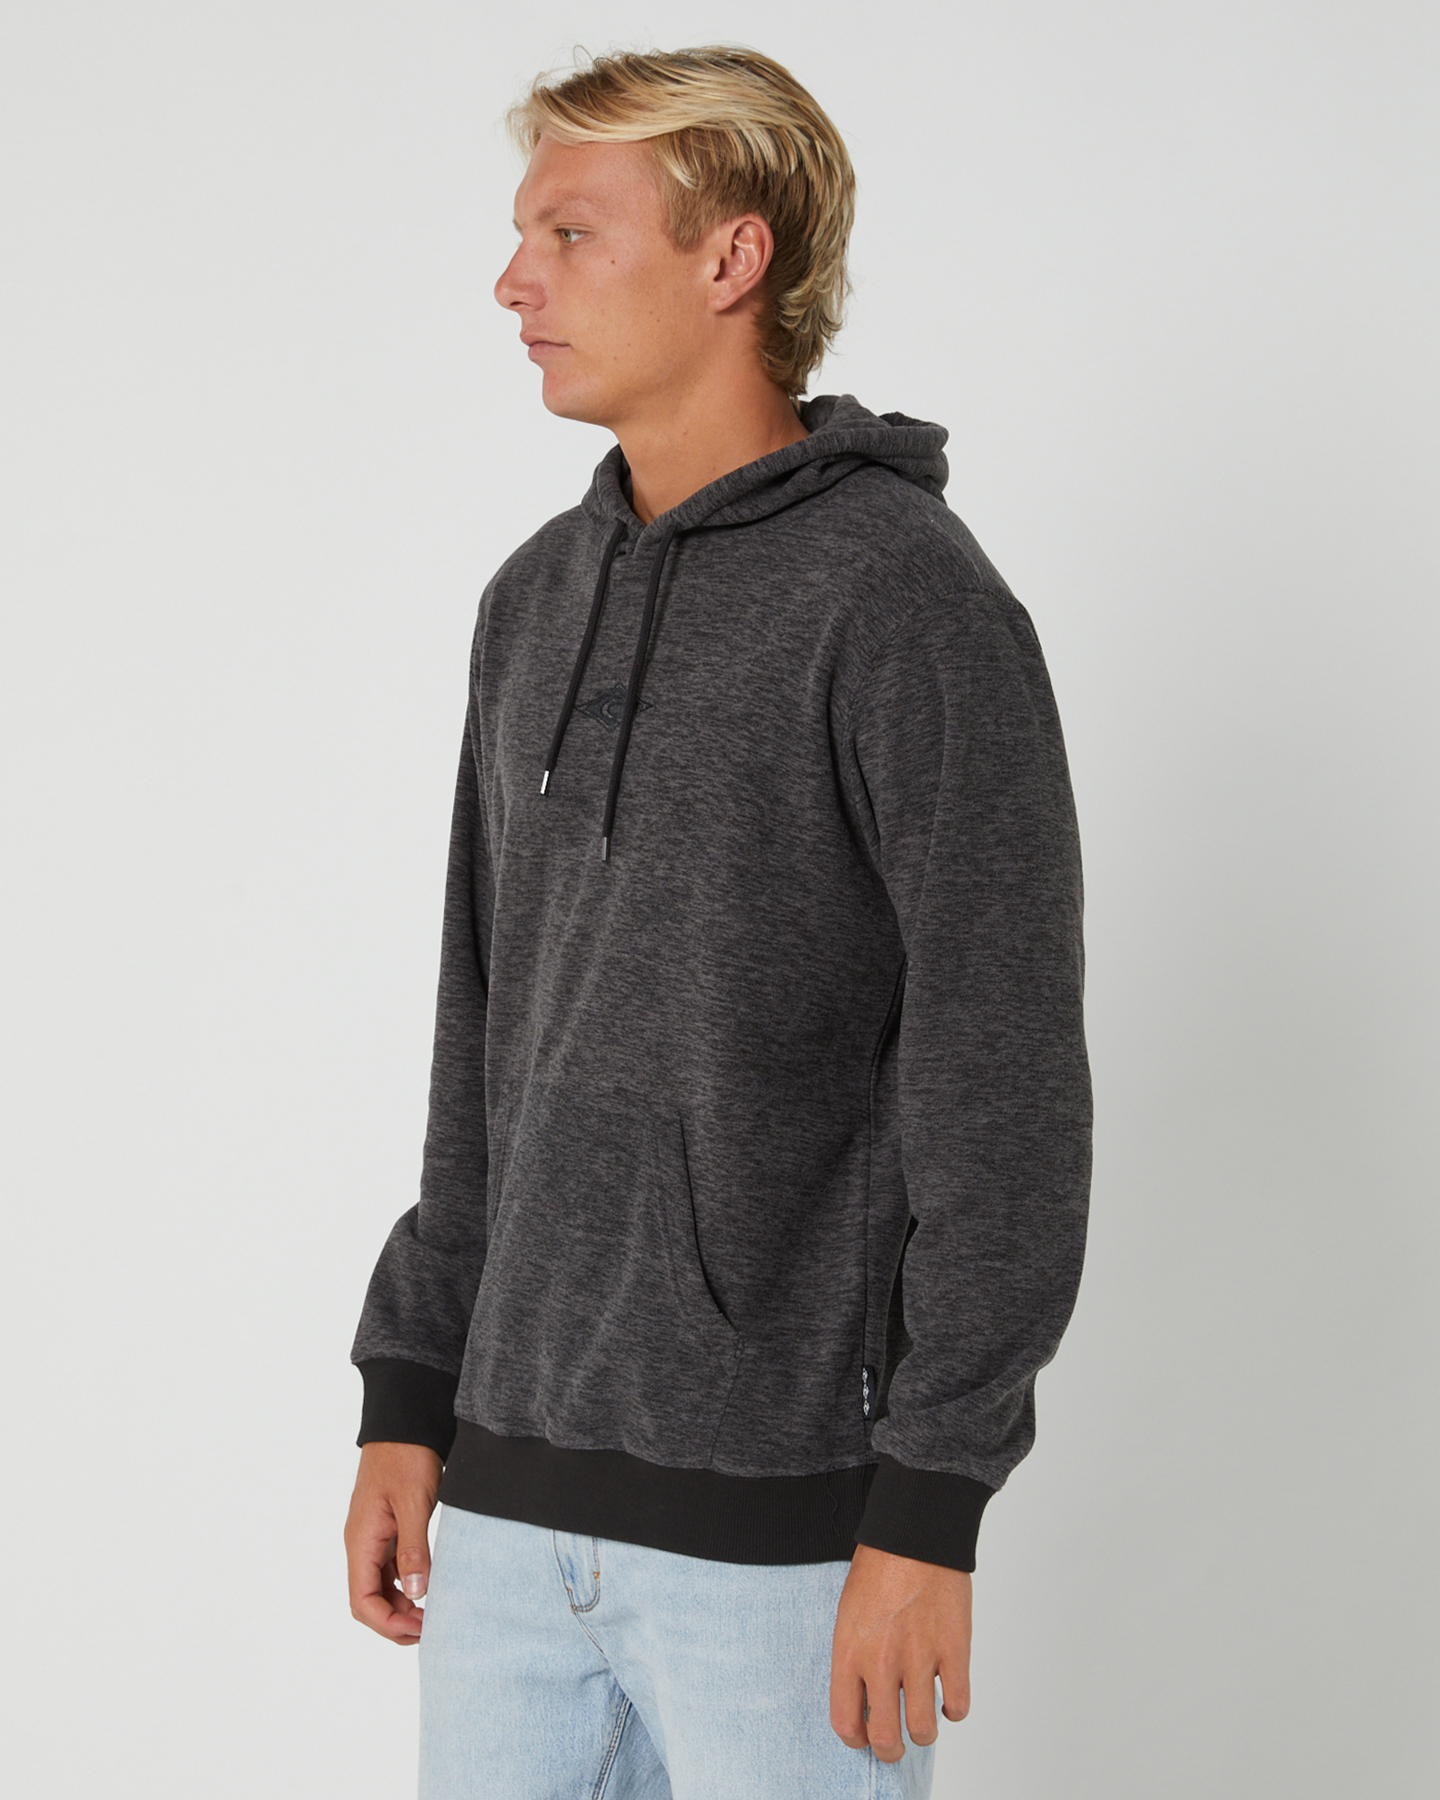 Rip Curl Avoca Recycled Hood - Black Marle | SurfStitch